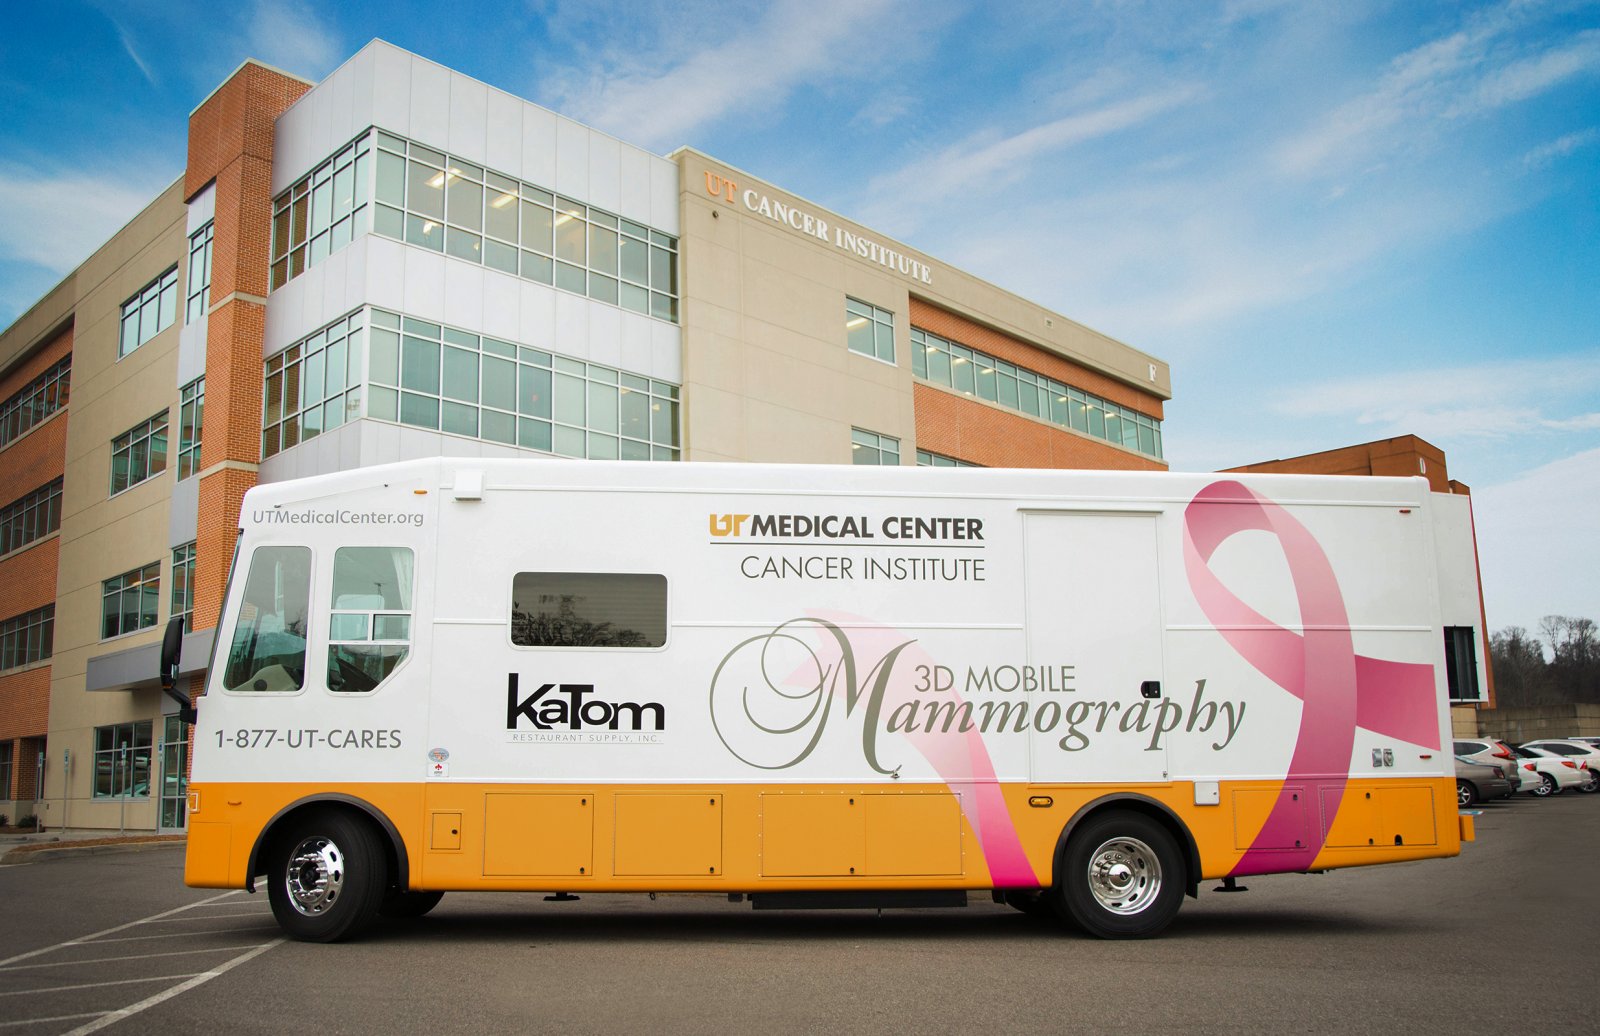 Mobile Mammography Unit parked in front of the Cancer Institute at UT Medical Center in Knoxville, Tennessee